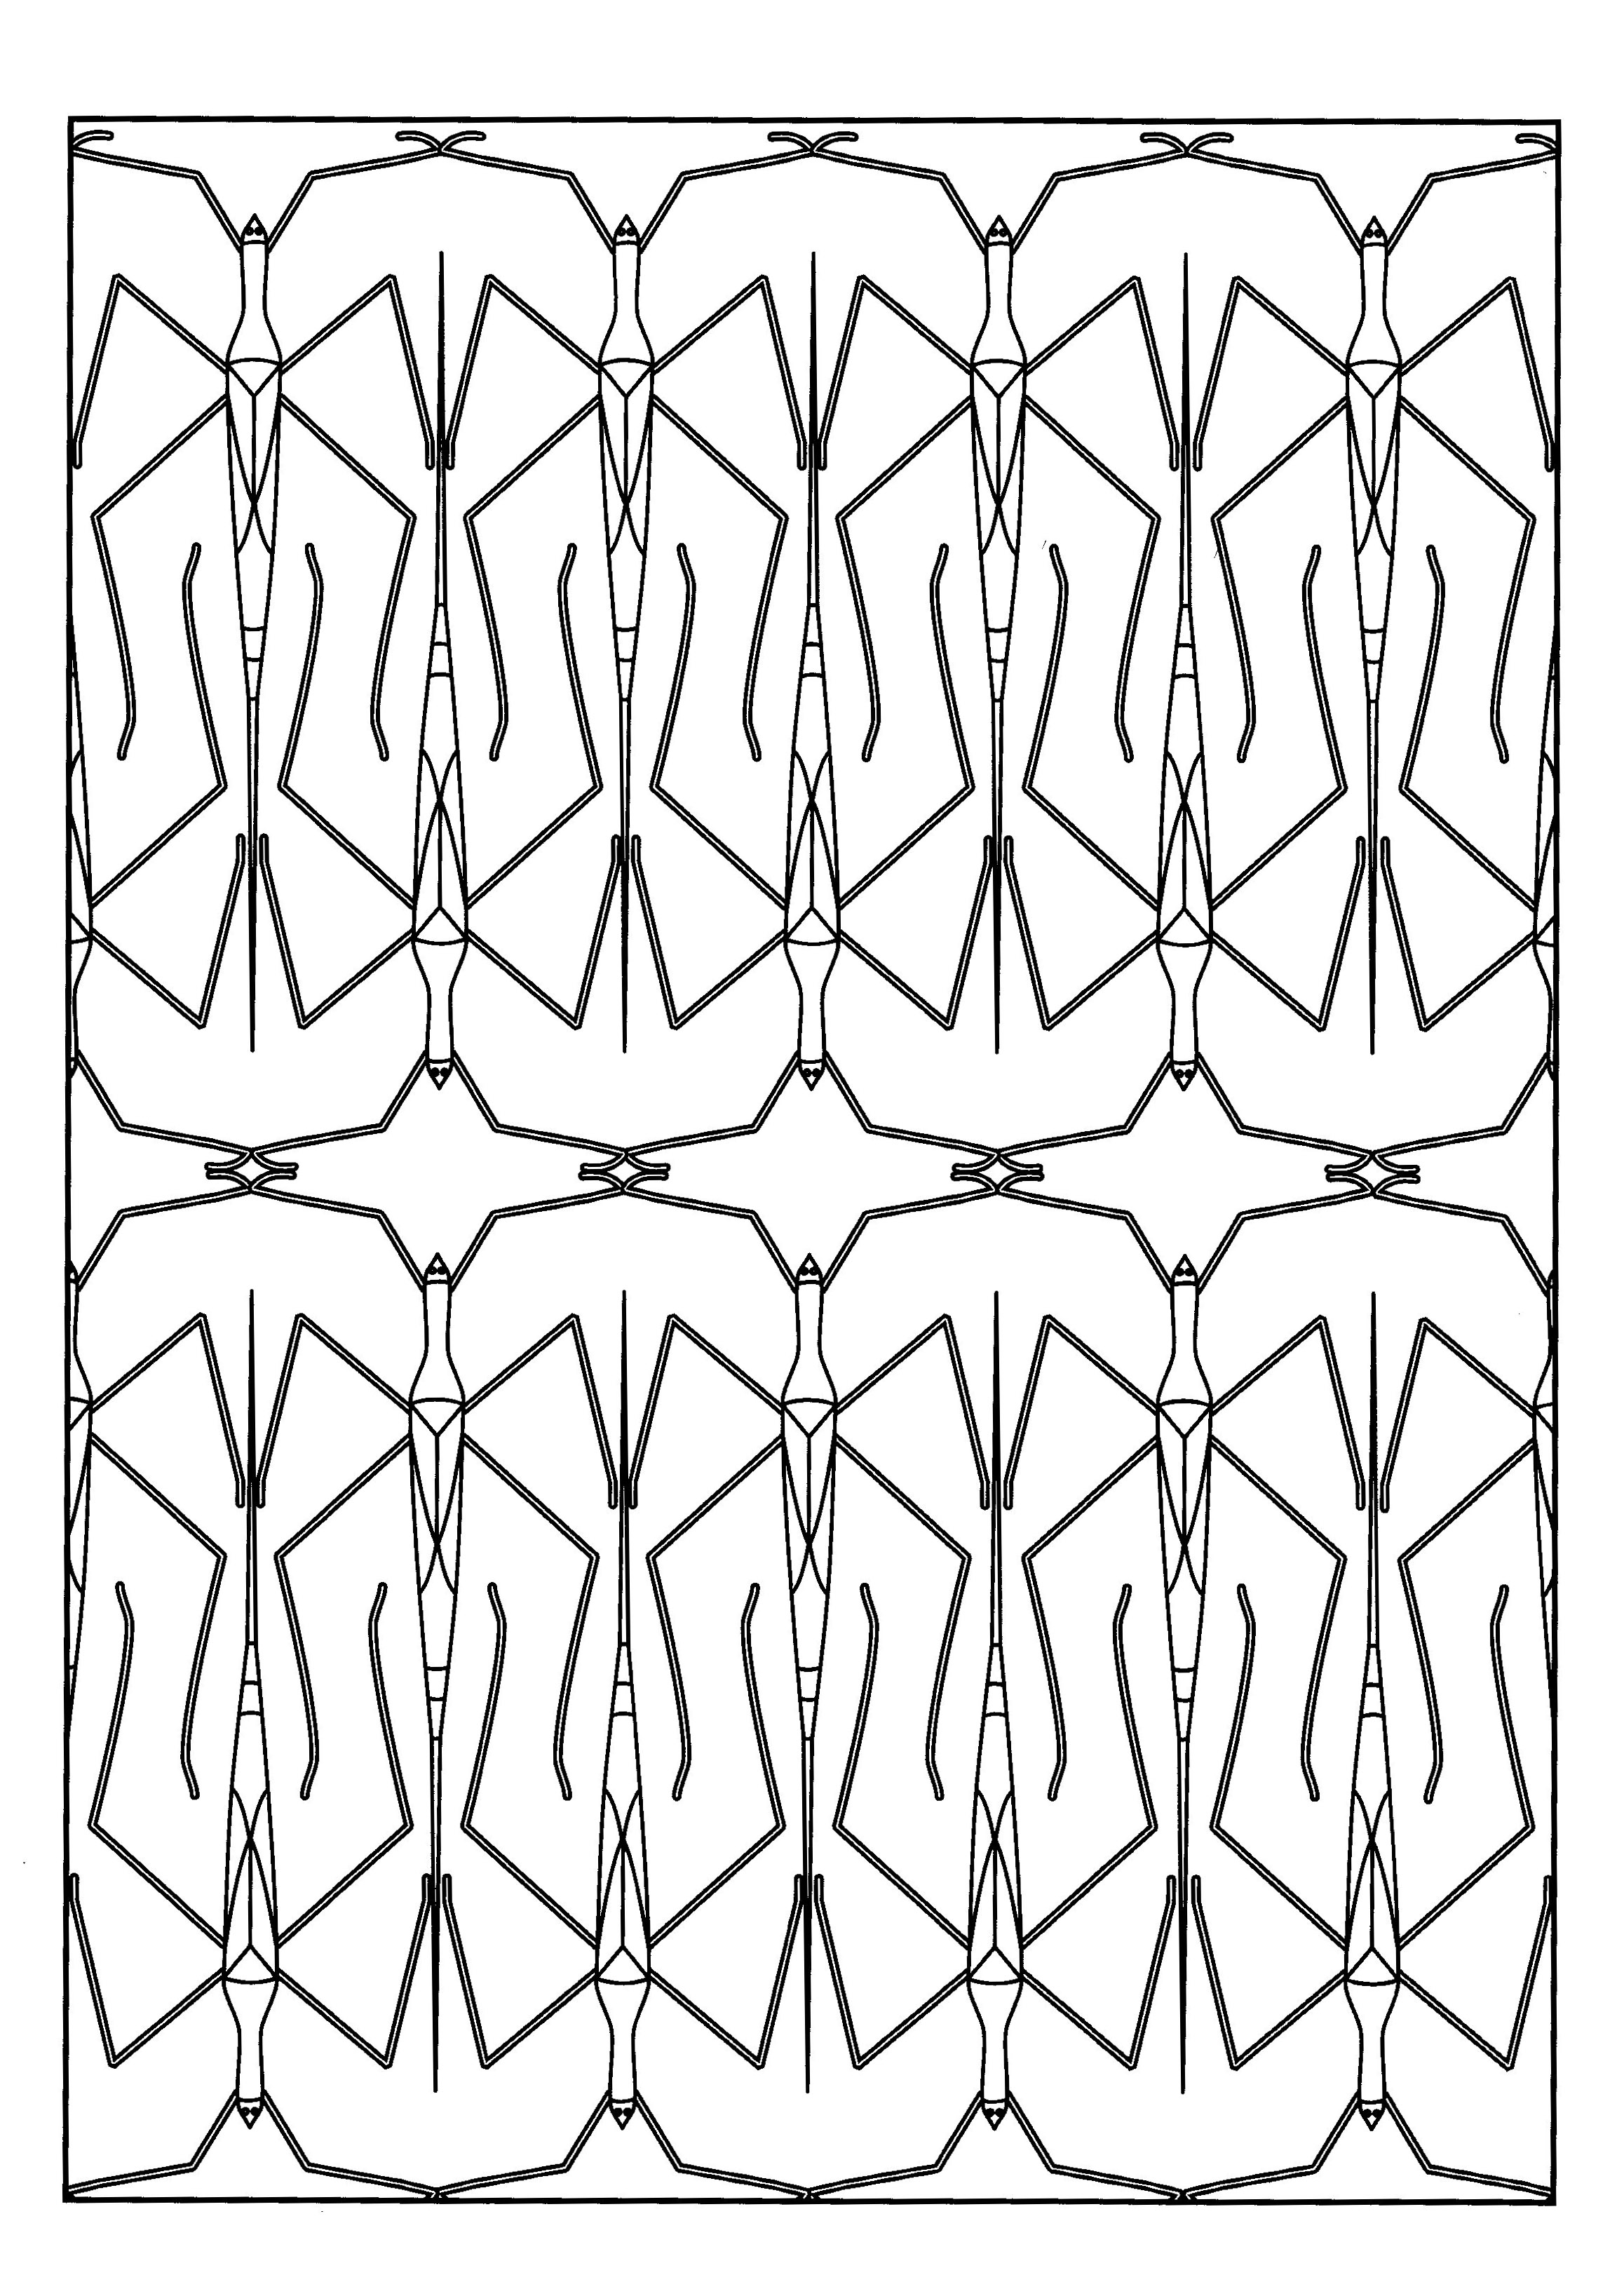 Stick insects to color ... a symmetric coloring page